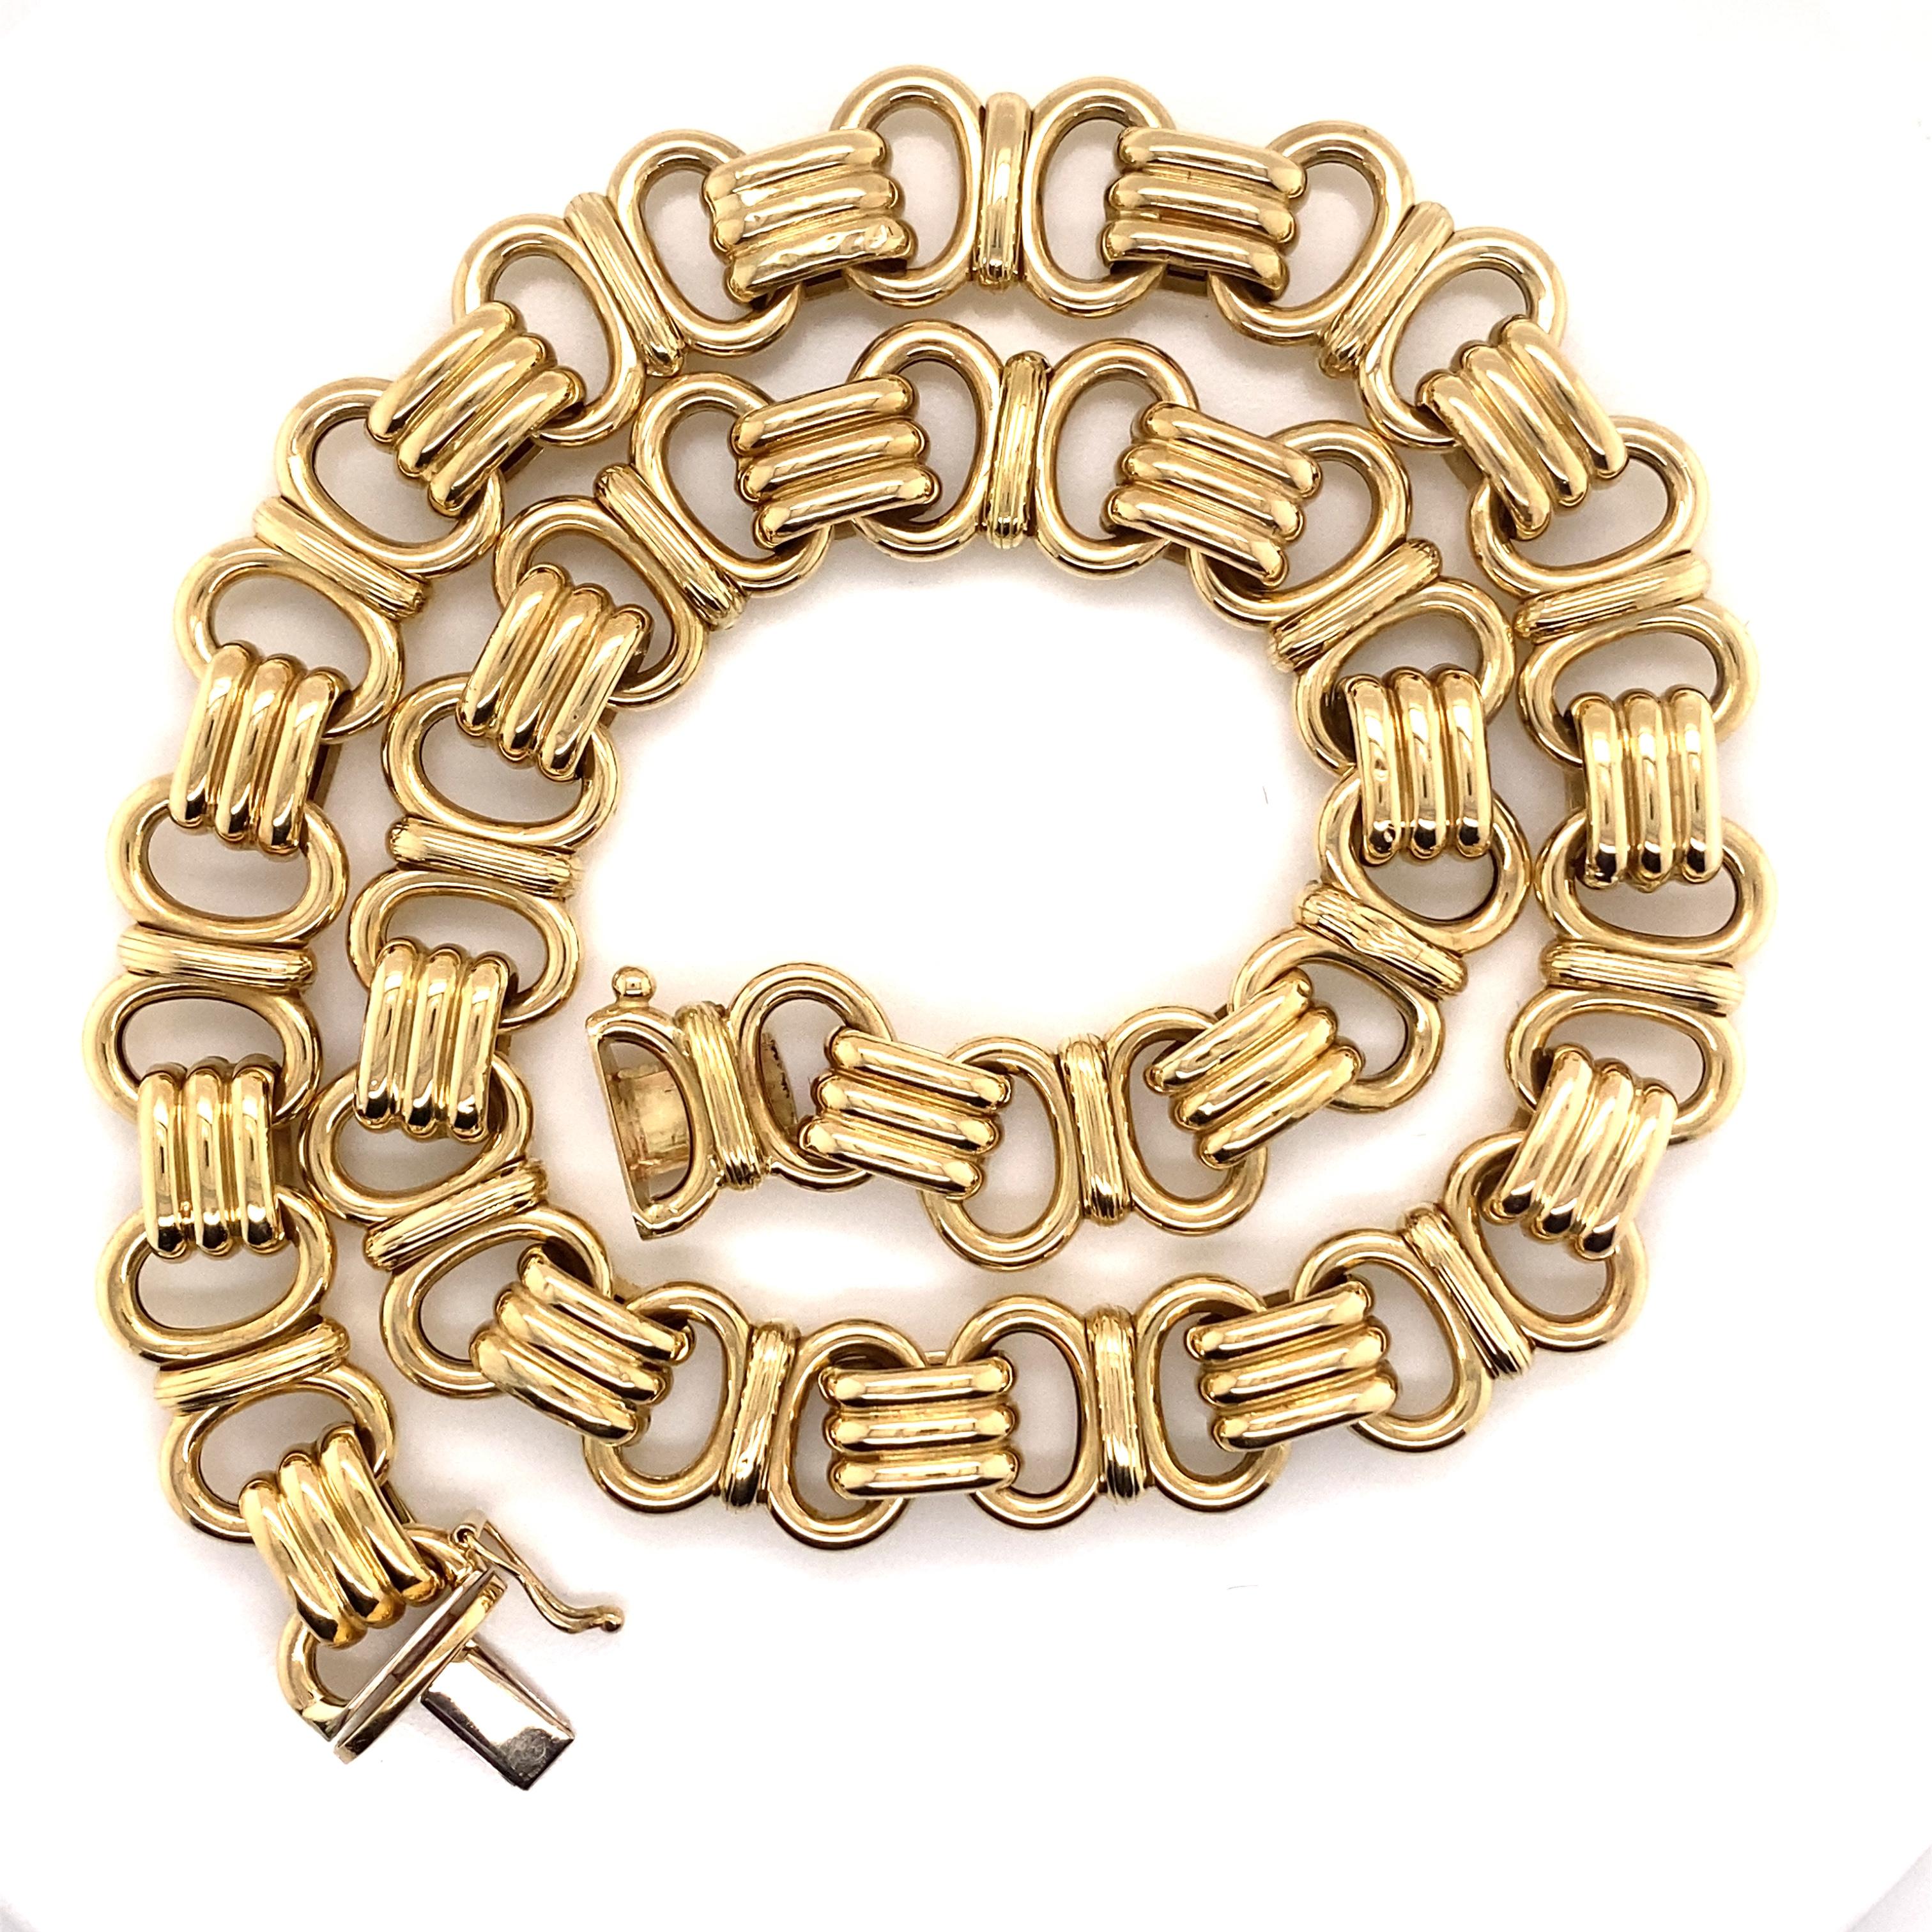 Vintage 2000 14K Yellow Gold Italian Fancy Link Necklace - The Italian made necklace measures 13.5mm wide and 17 inches long and features a plunger clasp with a figure 8 safety. The necklace weighs 30 grams.